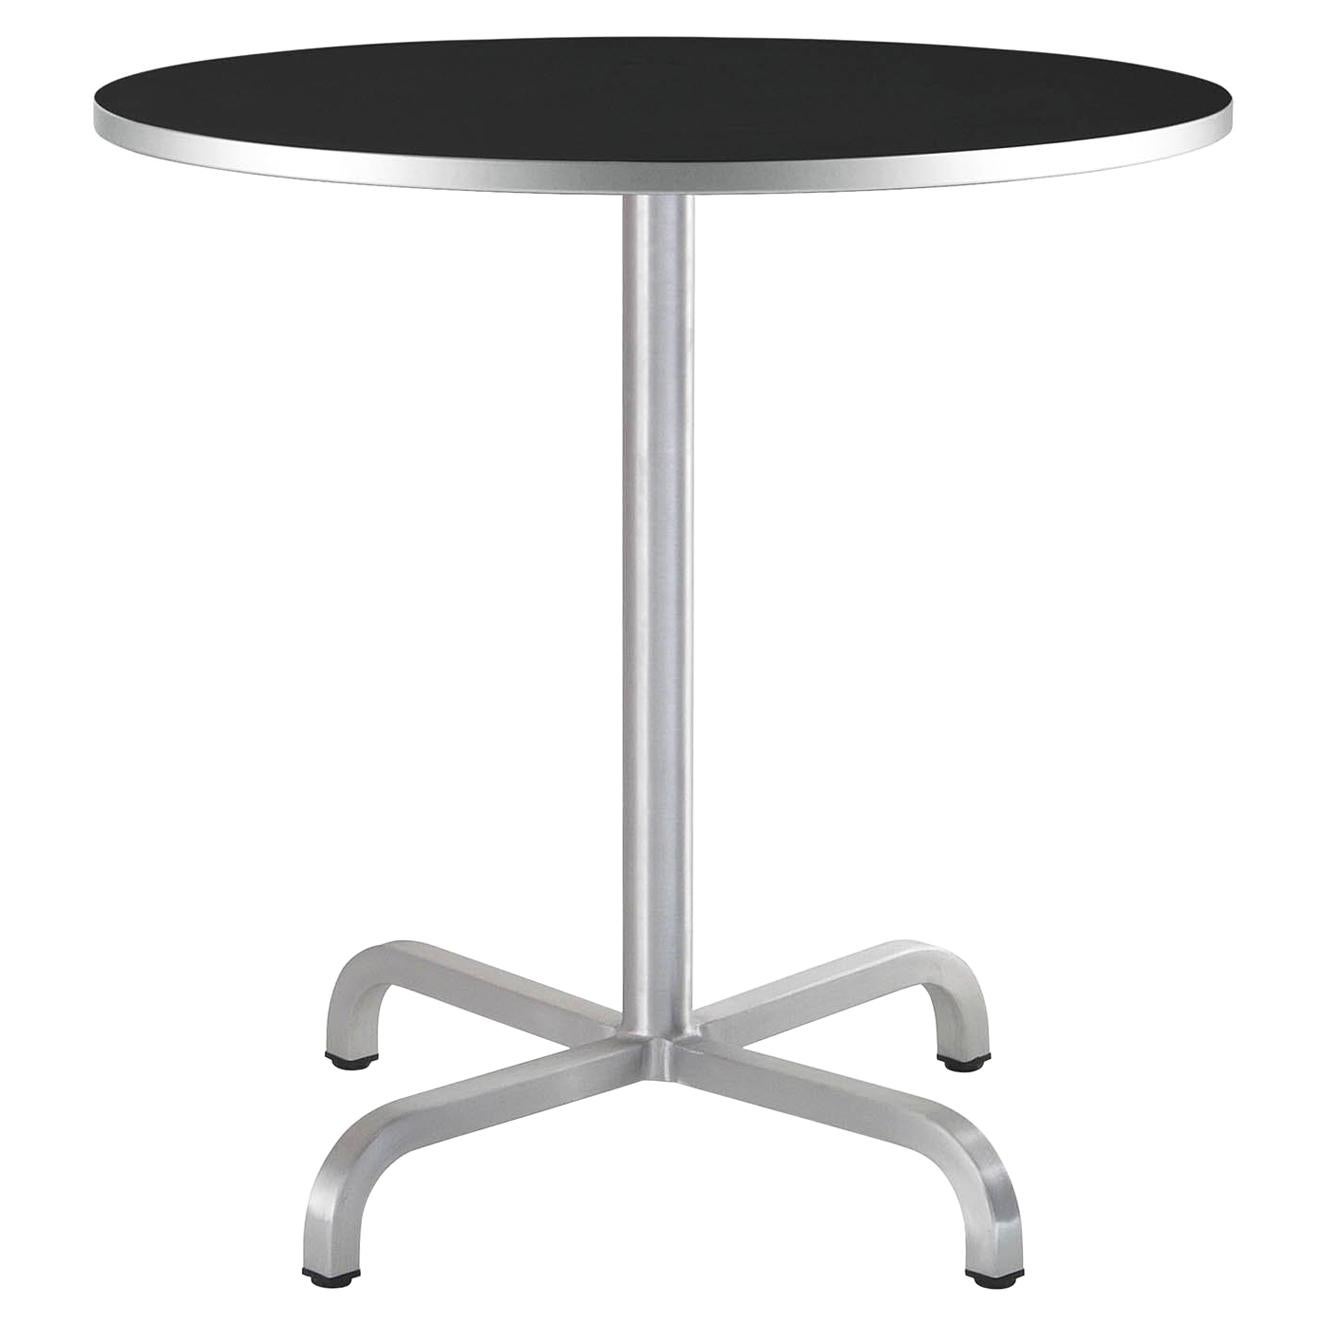 Emeco 20-06 Medium Round Café Table with Black Laminate Top by Norman Foster For Sale